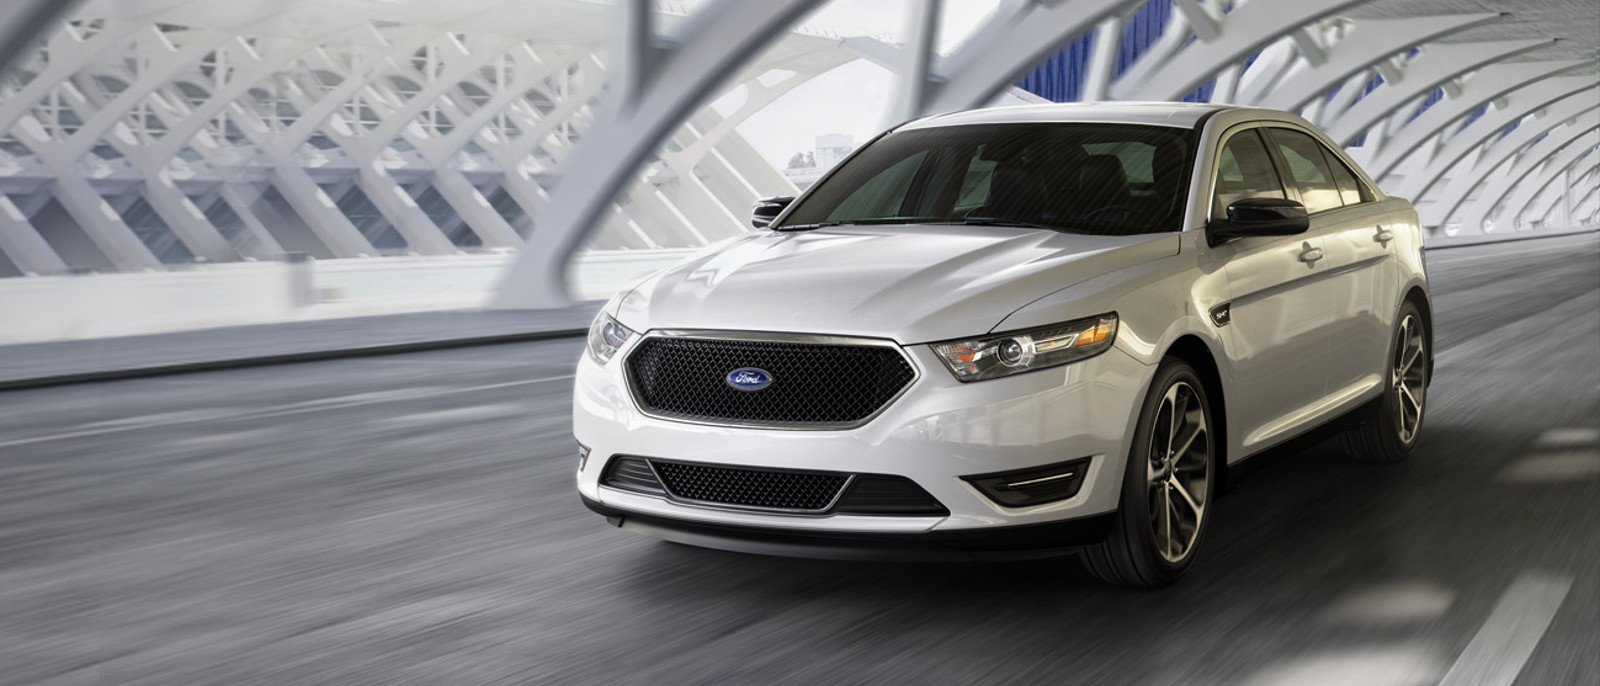 2015 Ford Taurus MPG Rating | River View Ford